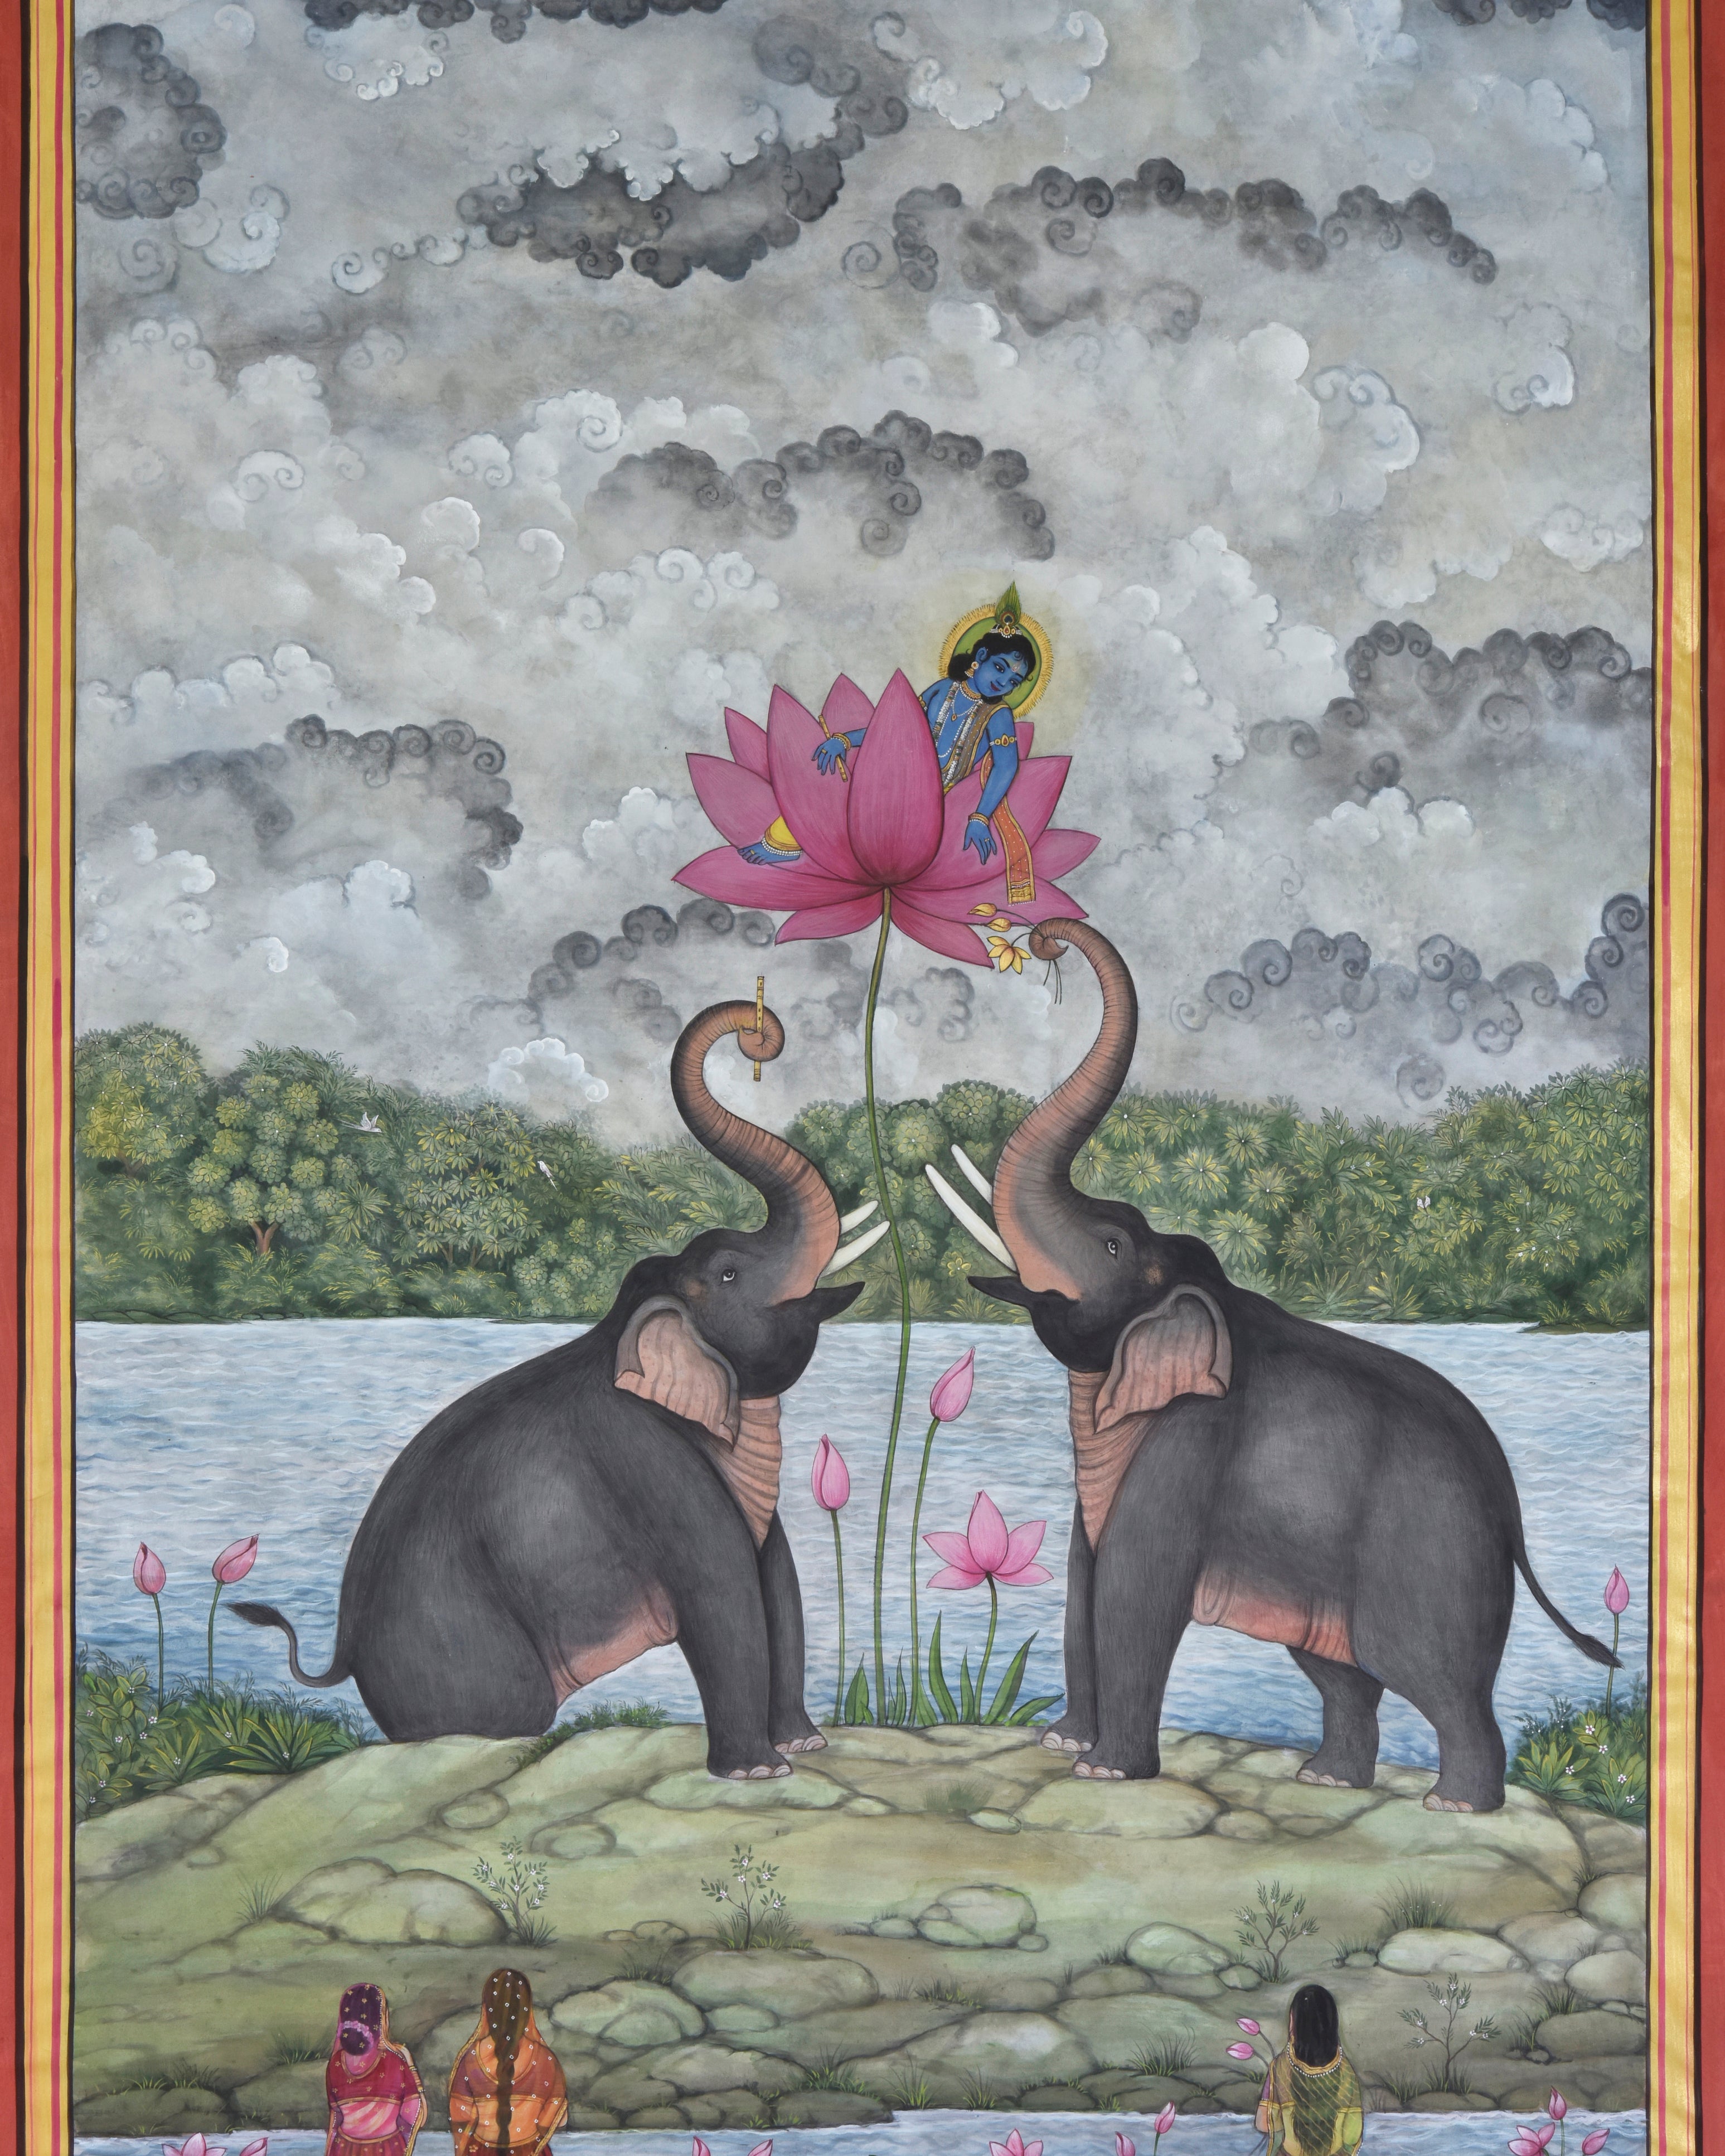 Pichwai Painting | Elephants with Lord Krishna in Lotus | Indian Art